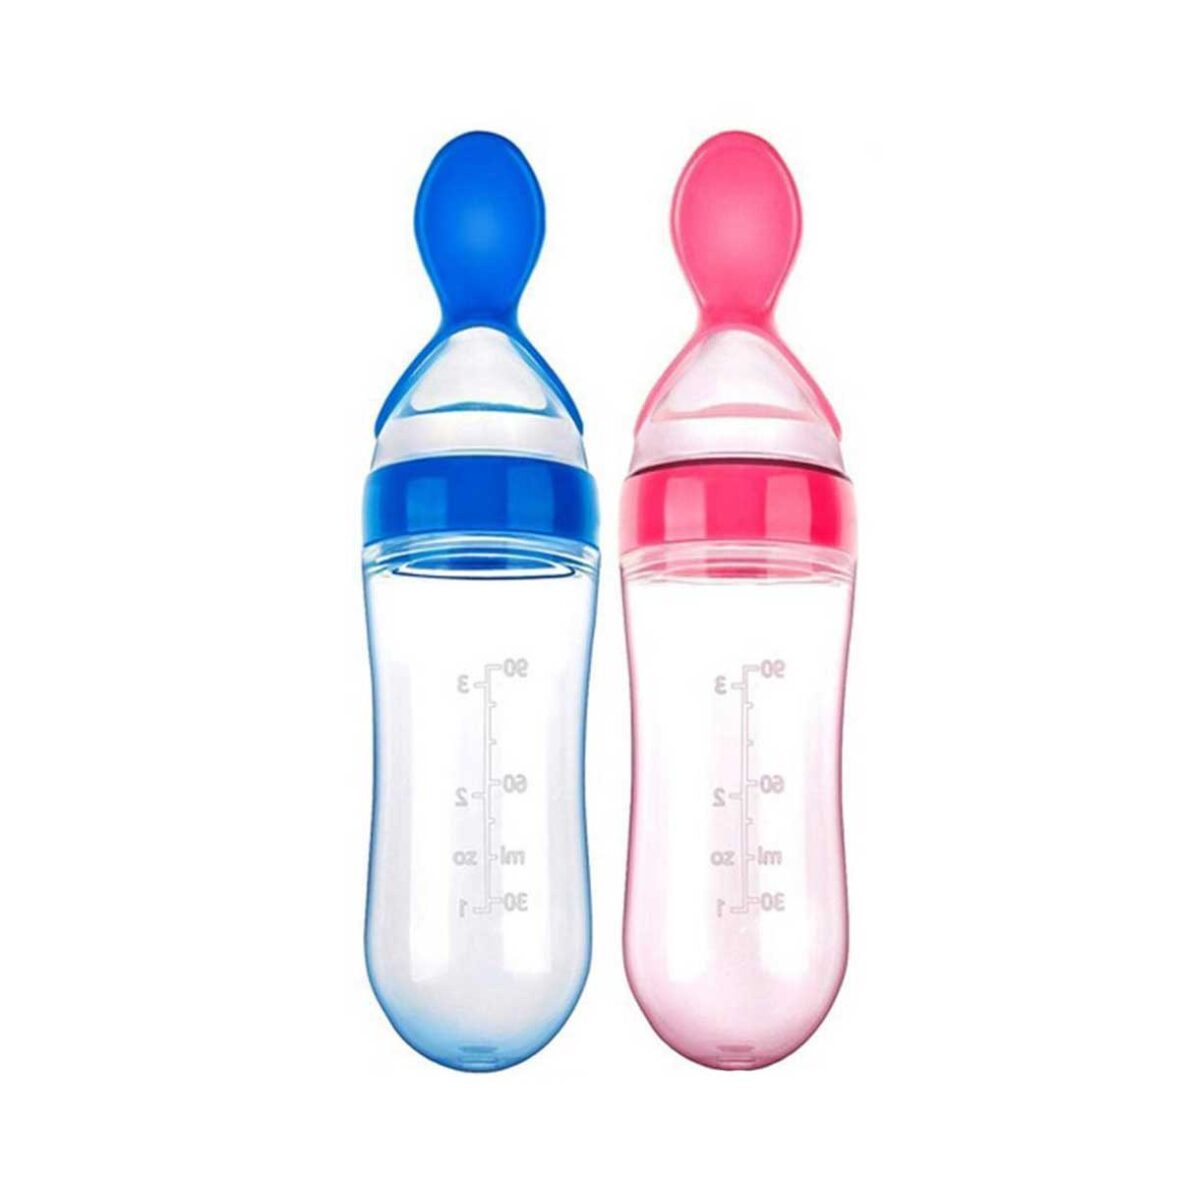 Baby Spoon Feeder